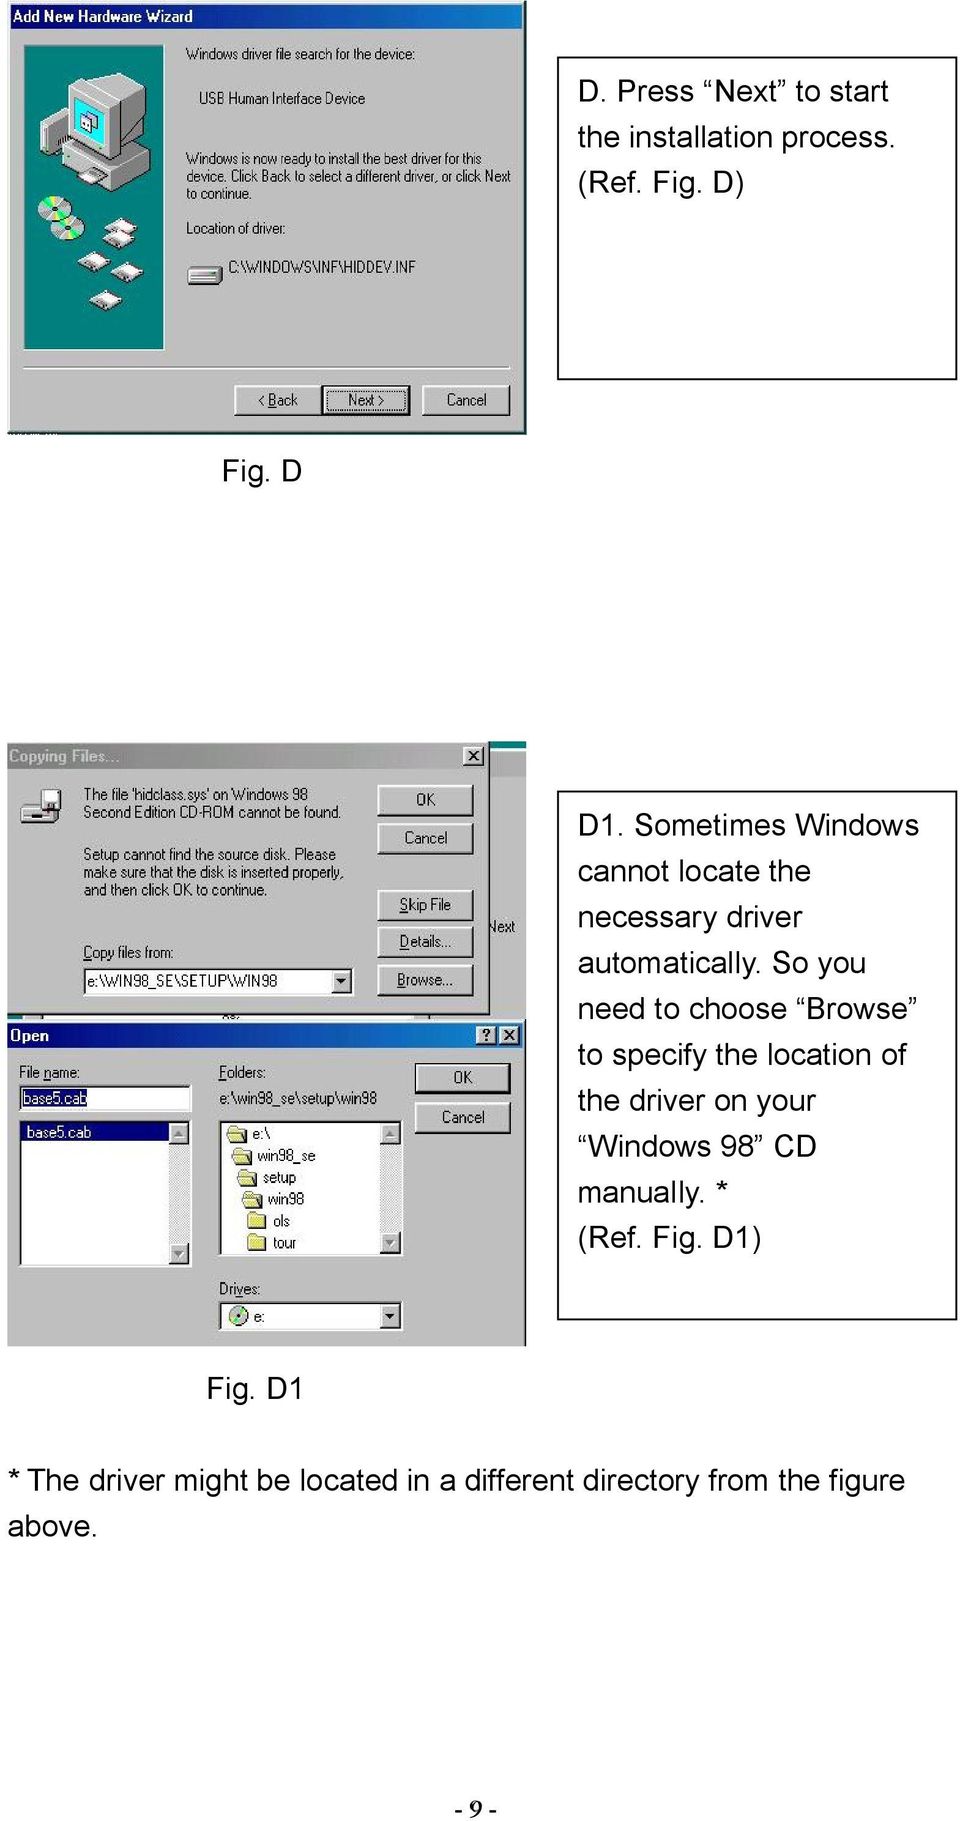 So you need to choose Browse to specify the location of the driver on your Windows 98